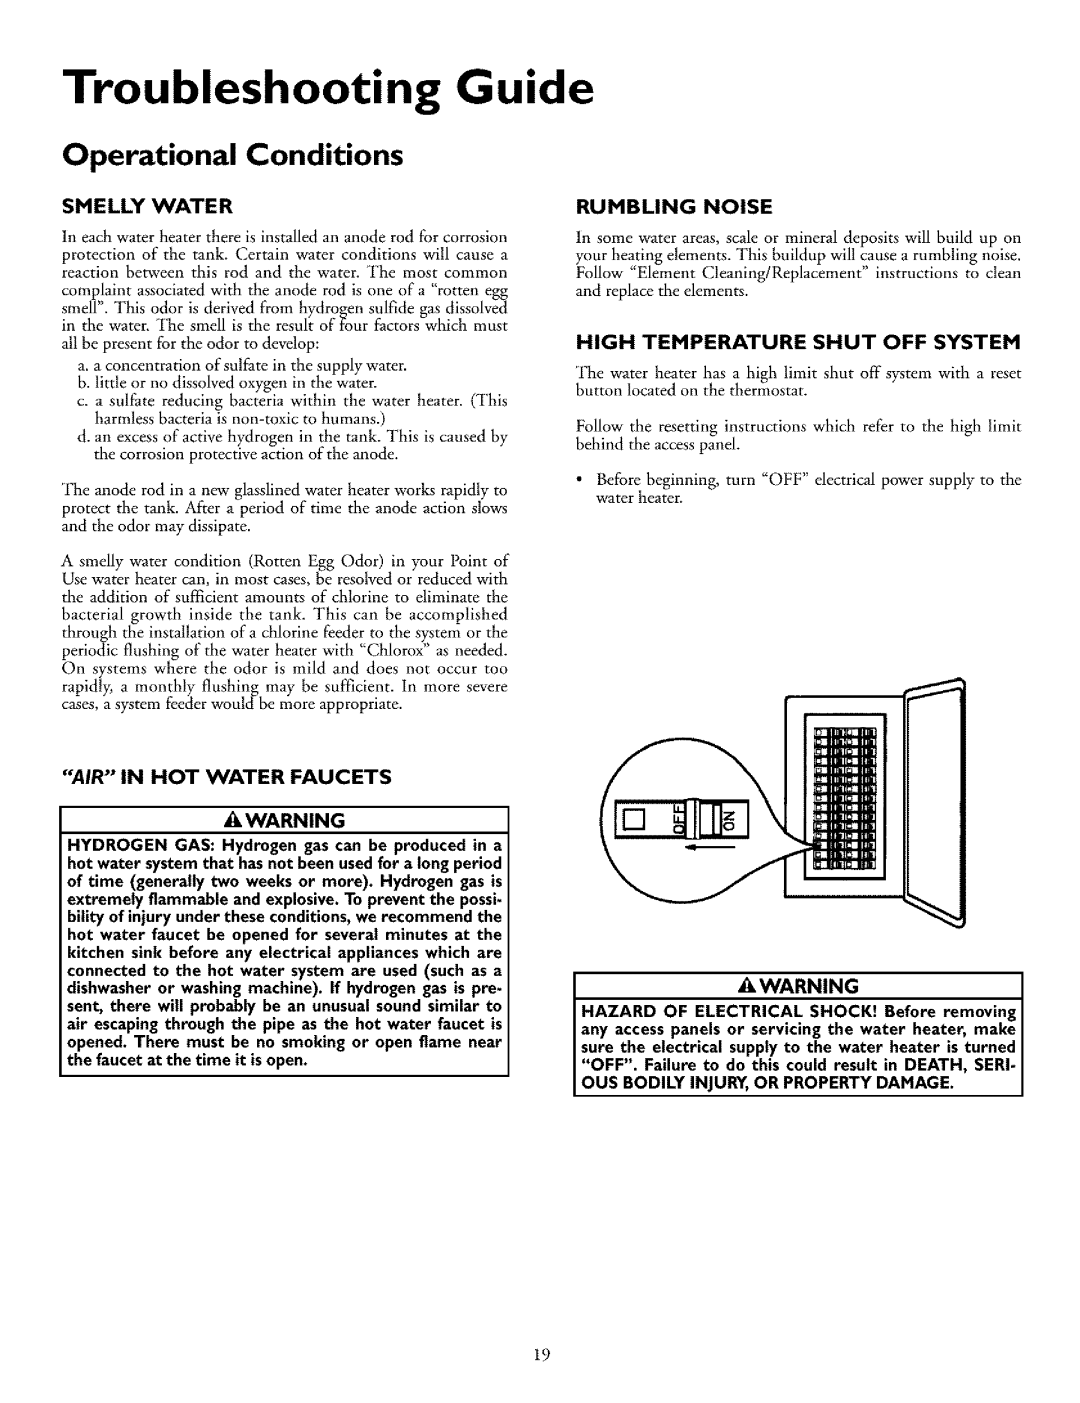 Kenmore 153.31702 Troubleshooting Guide, Operational Conditions, Smelly Water, Rumbling Noise, Air In Hot Water Faucets 